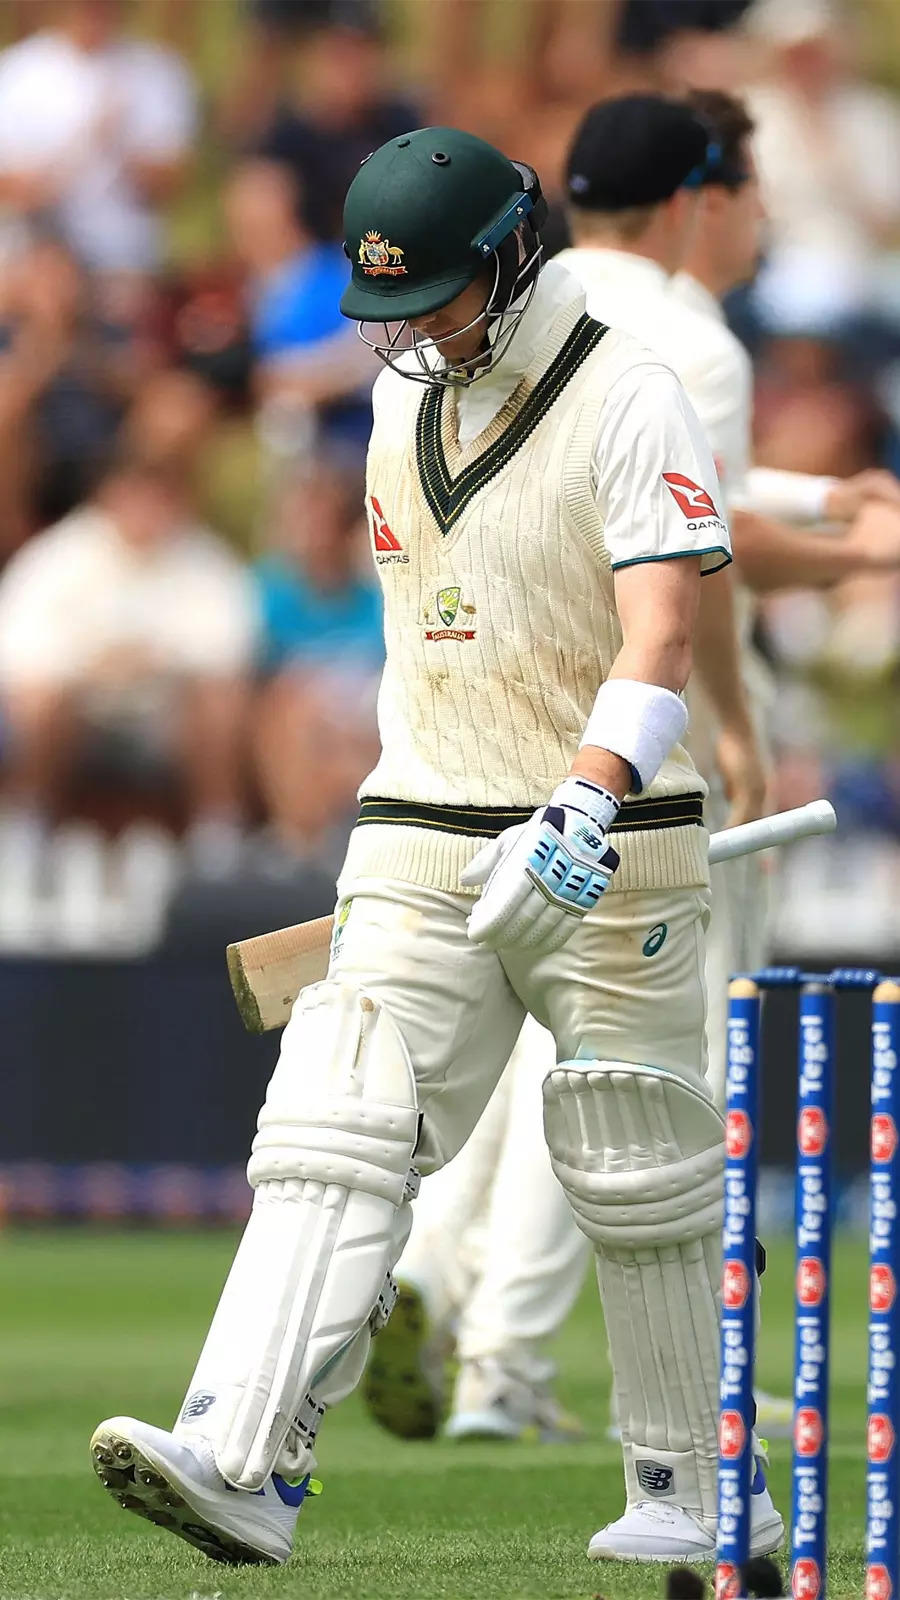 In Pics: Steve Smith's struggle as opening batter in Tests